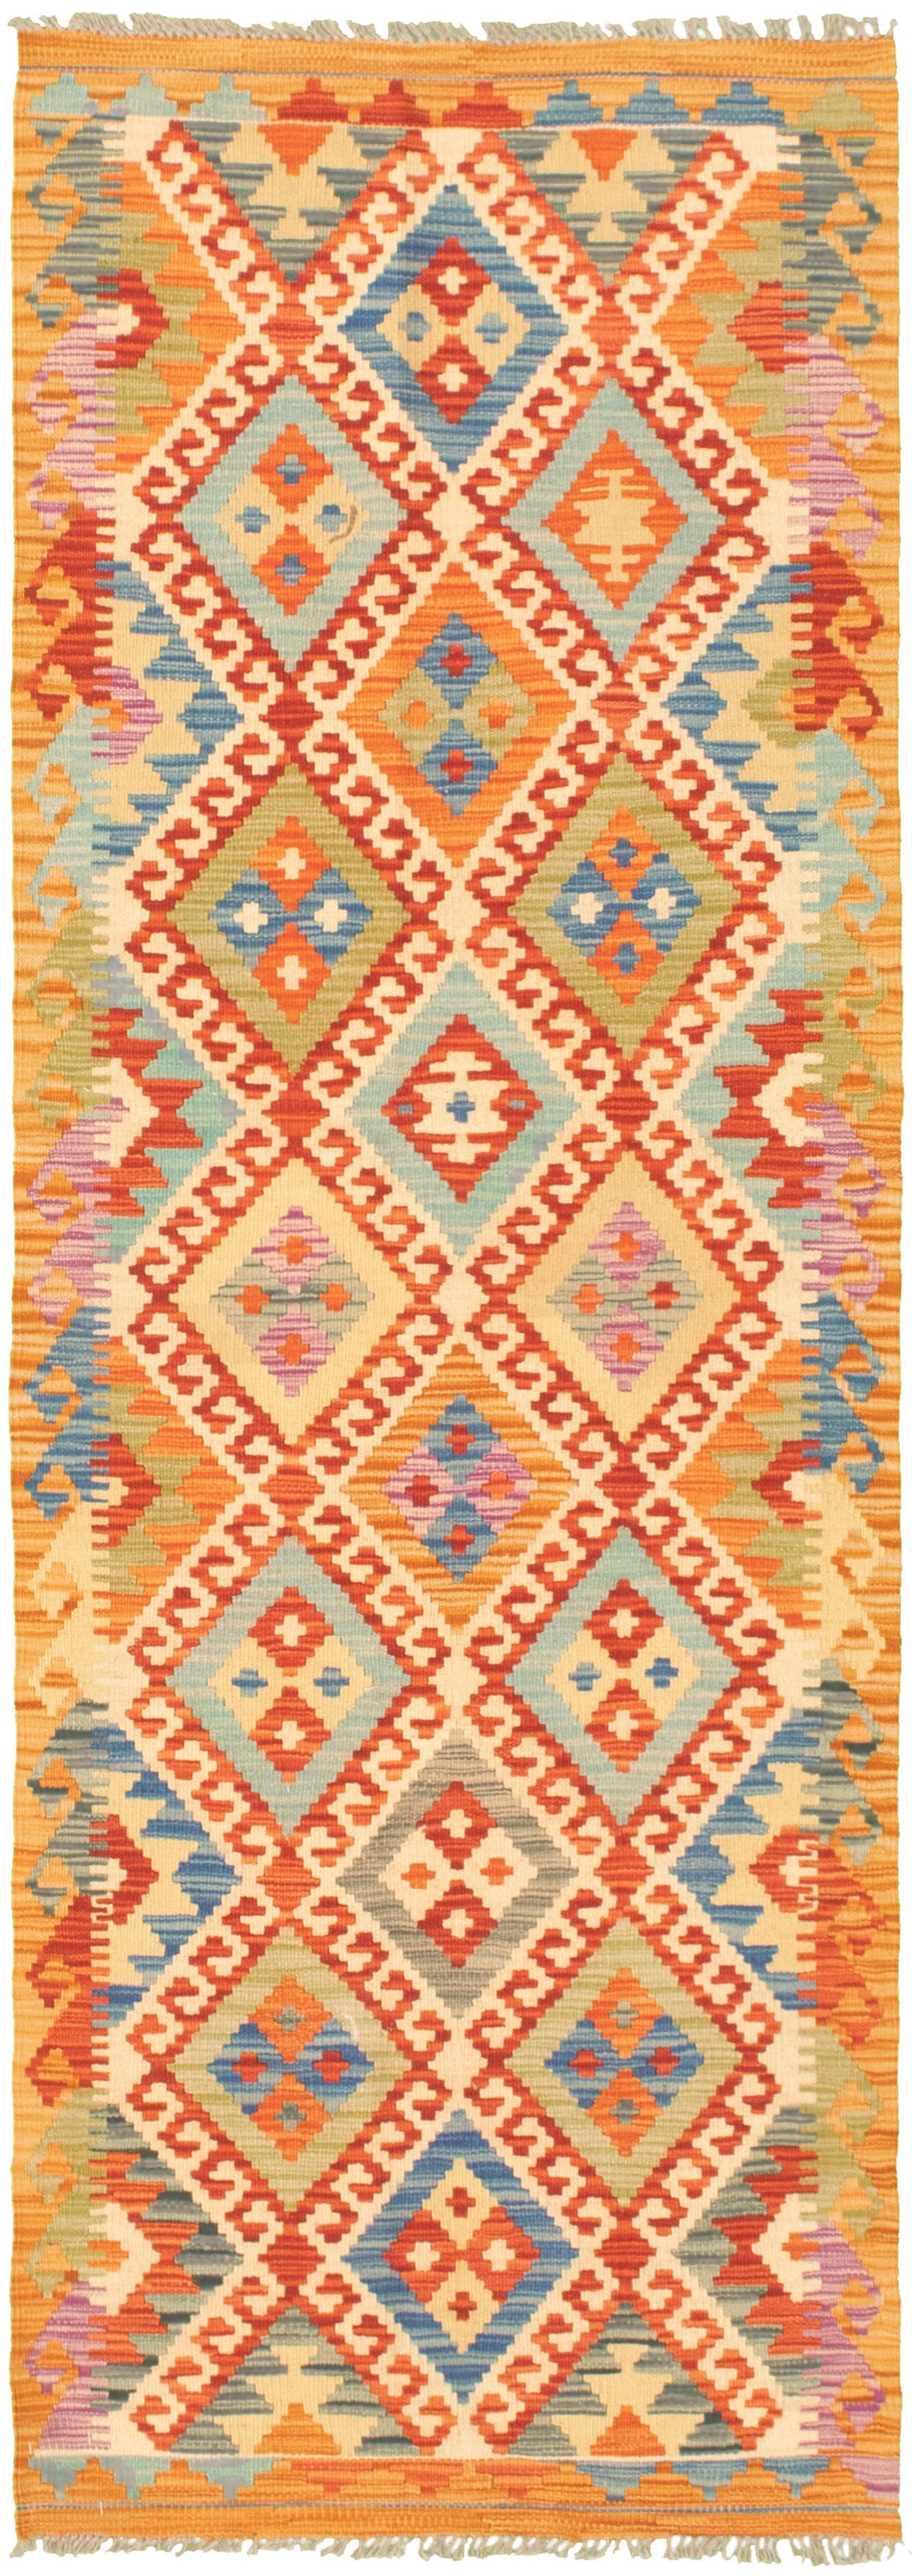 Hand woven Bold and Colorful  Cream Wool Kilim 2'7" x 7'10" Size: 2'7" x 7'10"  